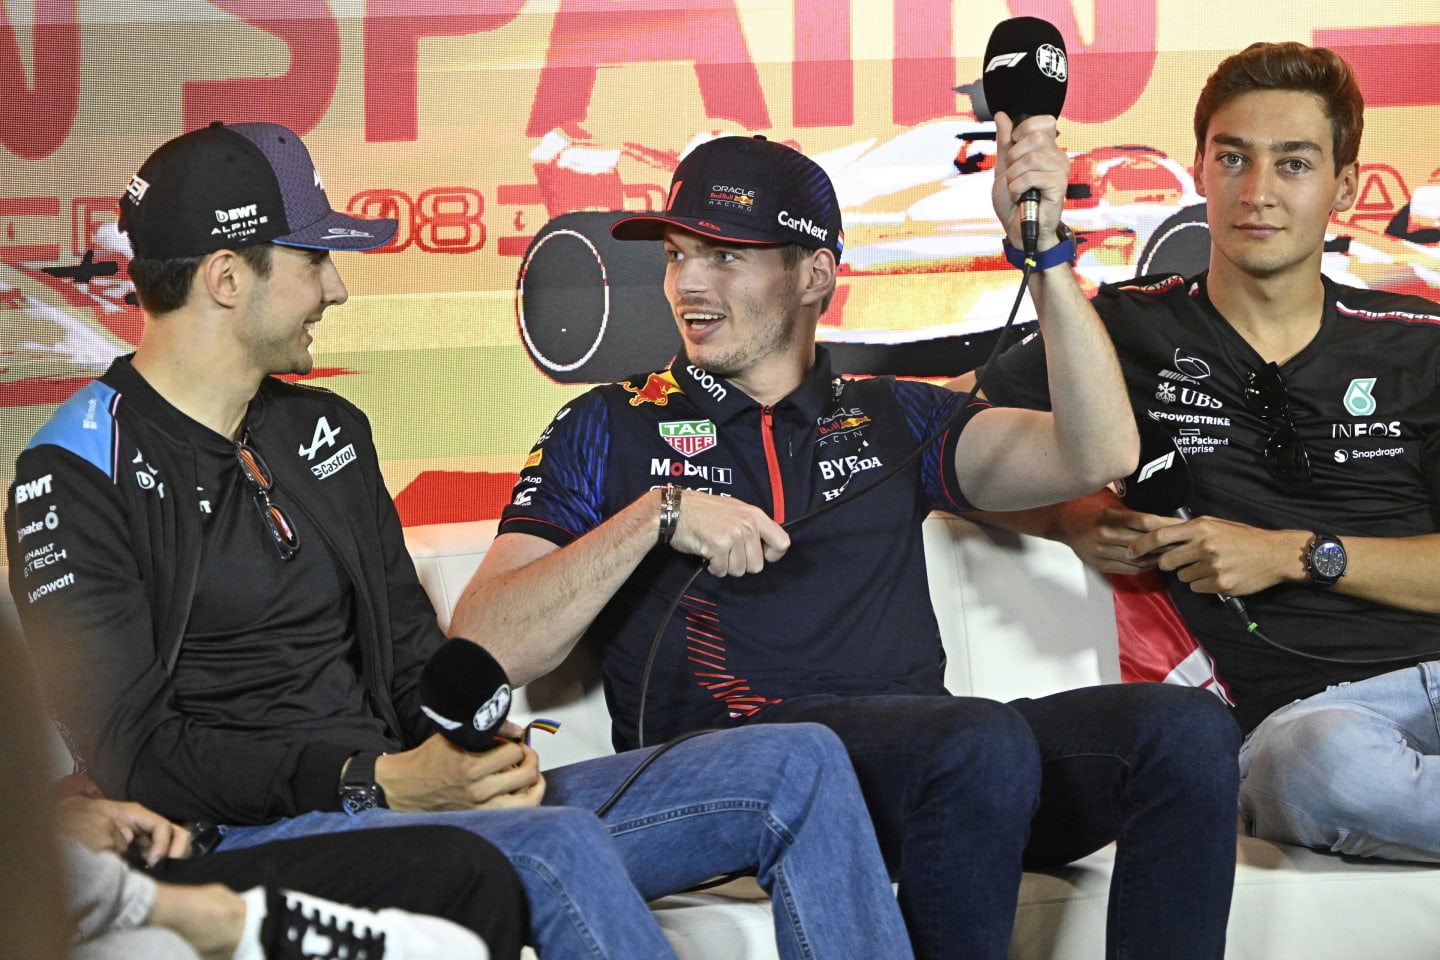 (From L) Alpine's French driver Esteban Ocon, Red Bull Racing's Dutch driver Max Verstappen and Mercedes' British driver George Russell attend a press conference ahead of the Spanish Formula One Grand Prix at the Circuit de Catalunya on June 1, 2023 in Montmelo, on the outskirts of Barcelona. (Photo by JAVIER SORIANO / AFP) (Photo by JAVIER SORIANO/AFP via Getty Images)